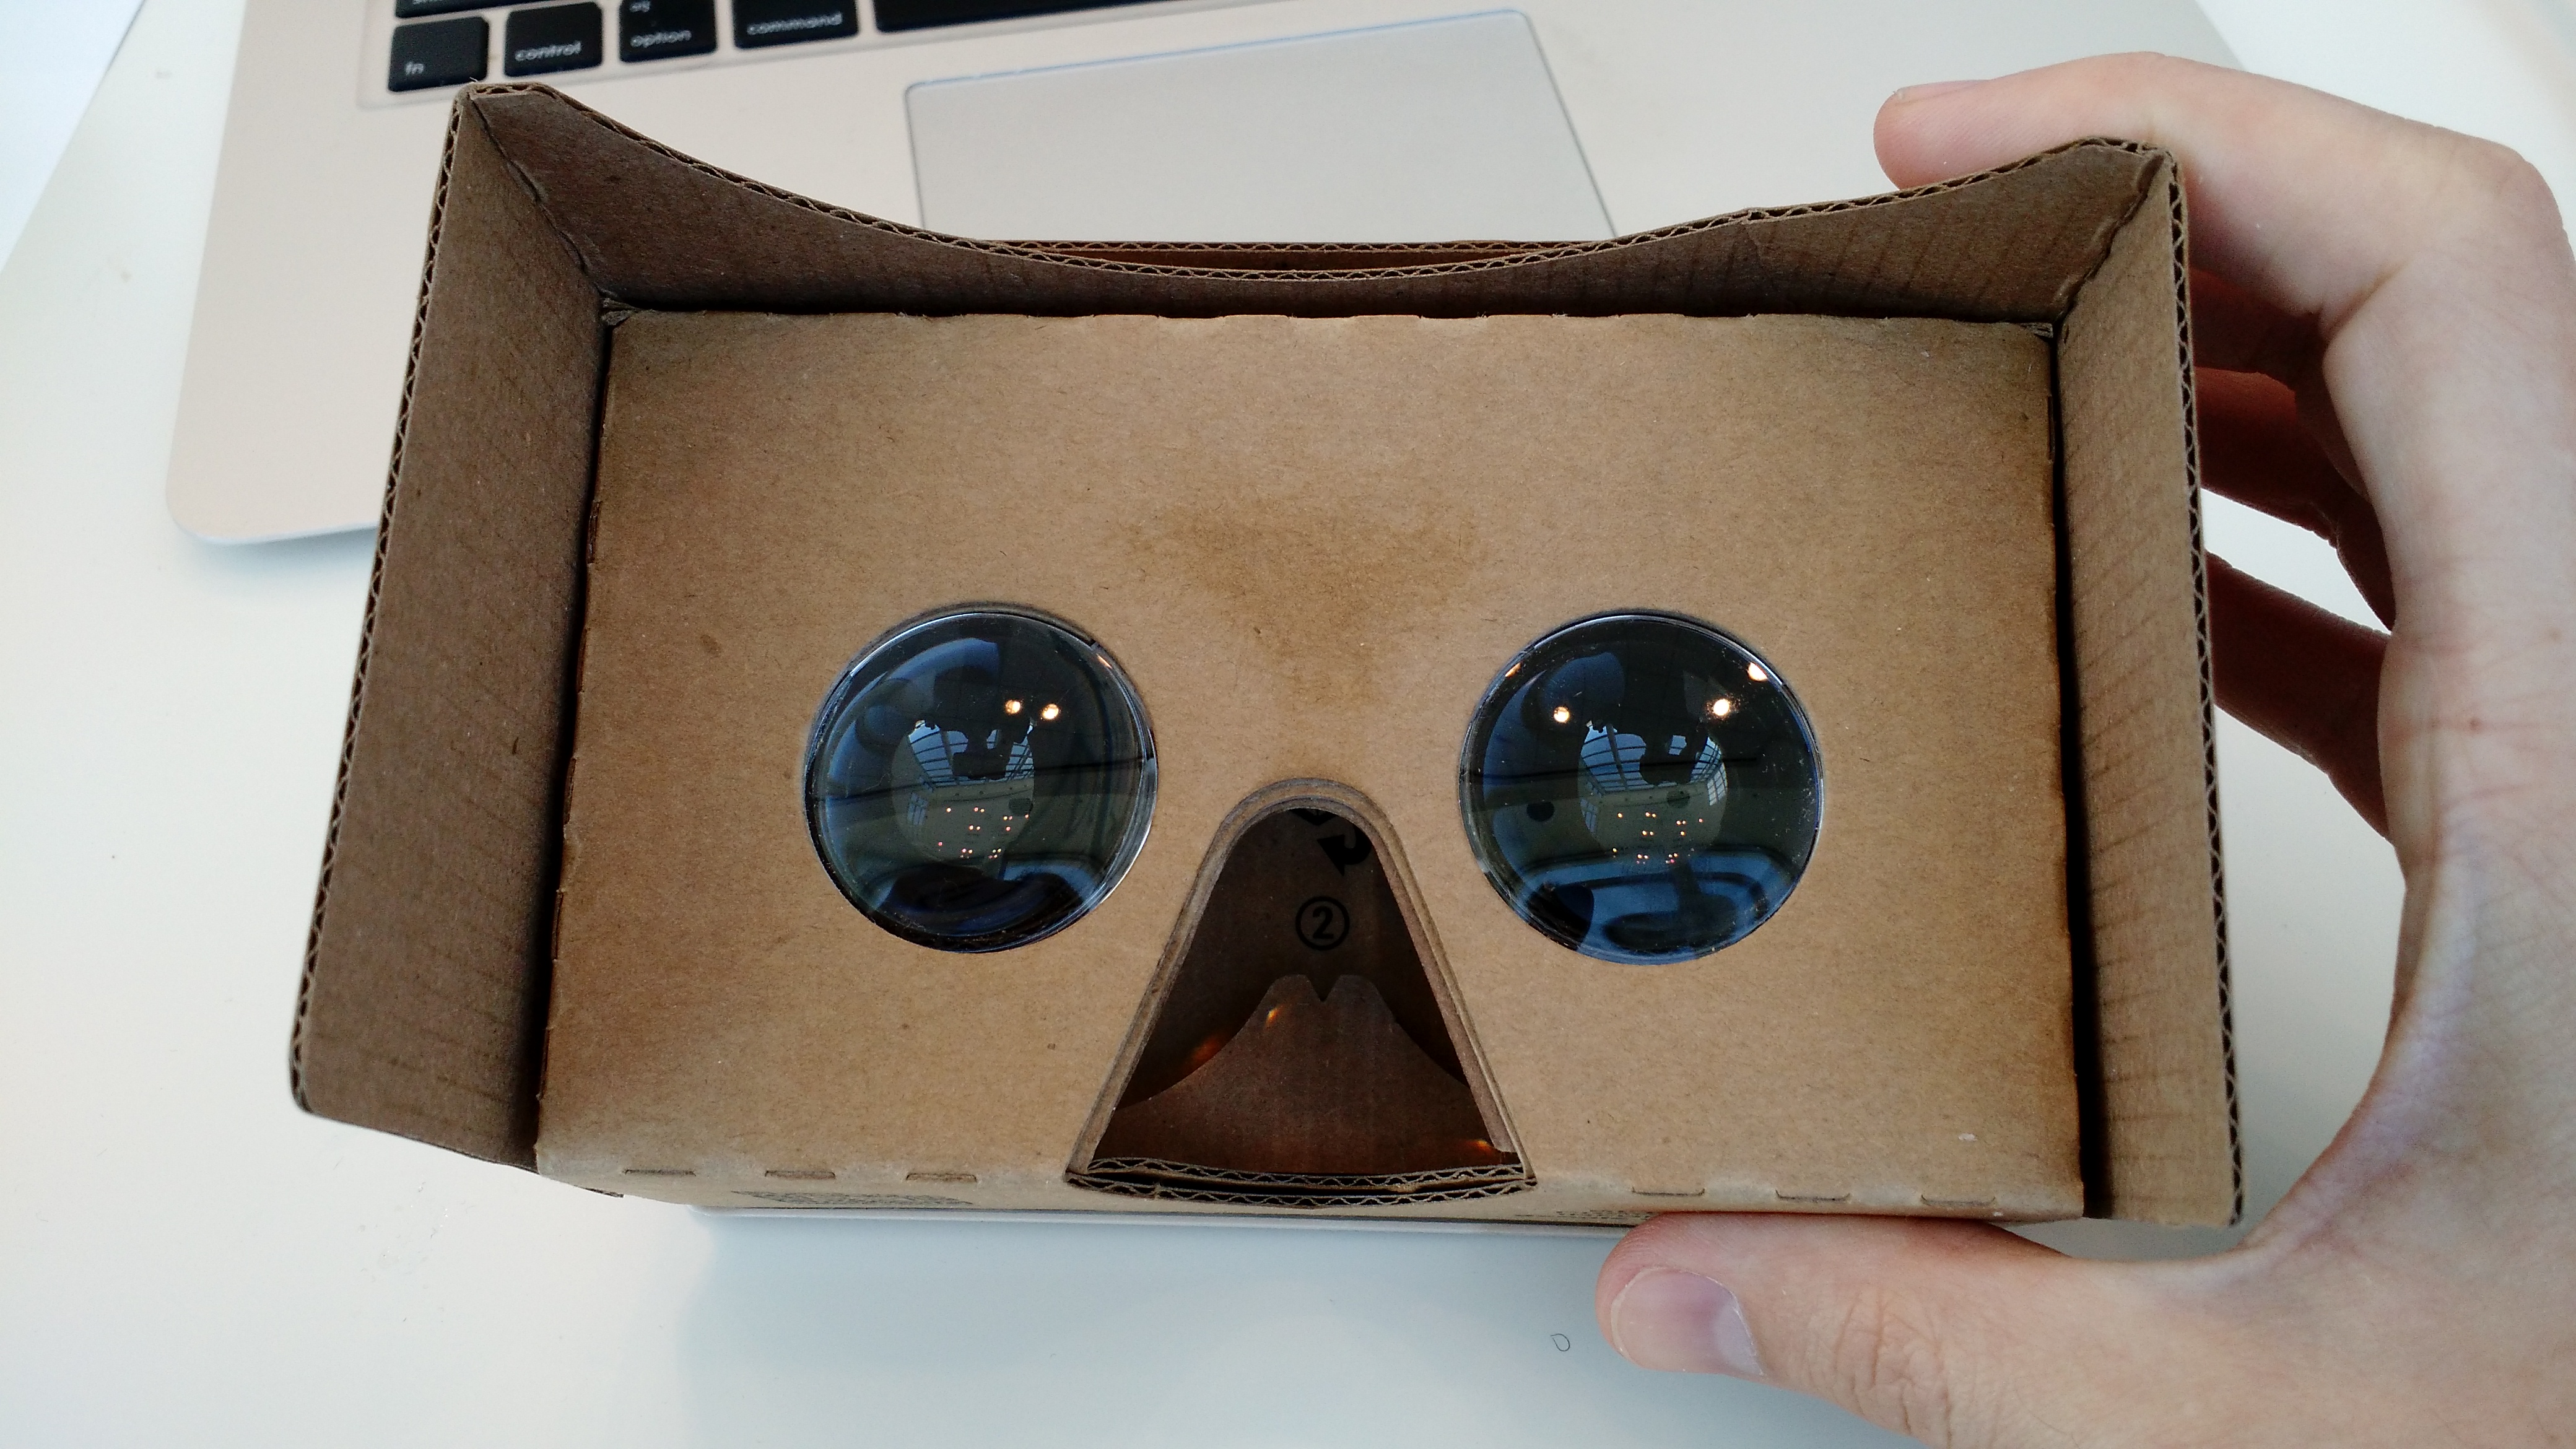 Google Cardboard v2, given out at the 2015 Google I/O conference in San Francisco.